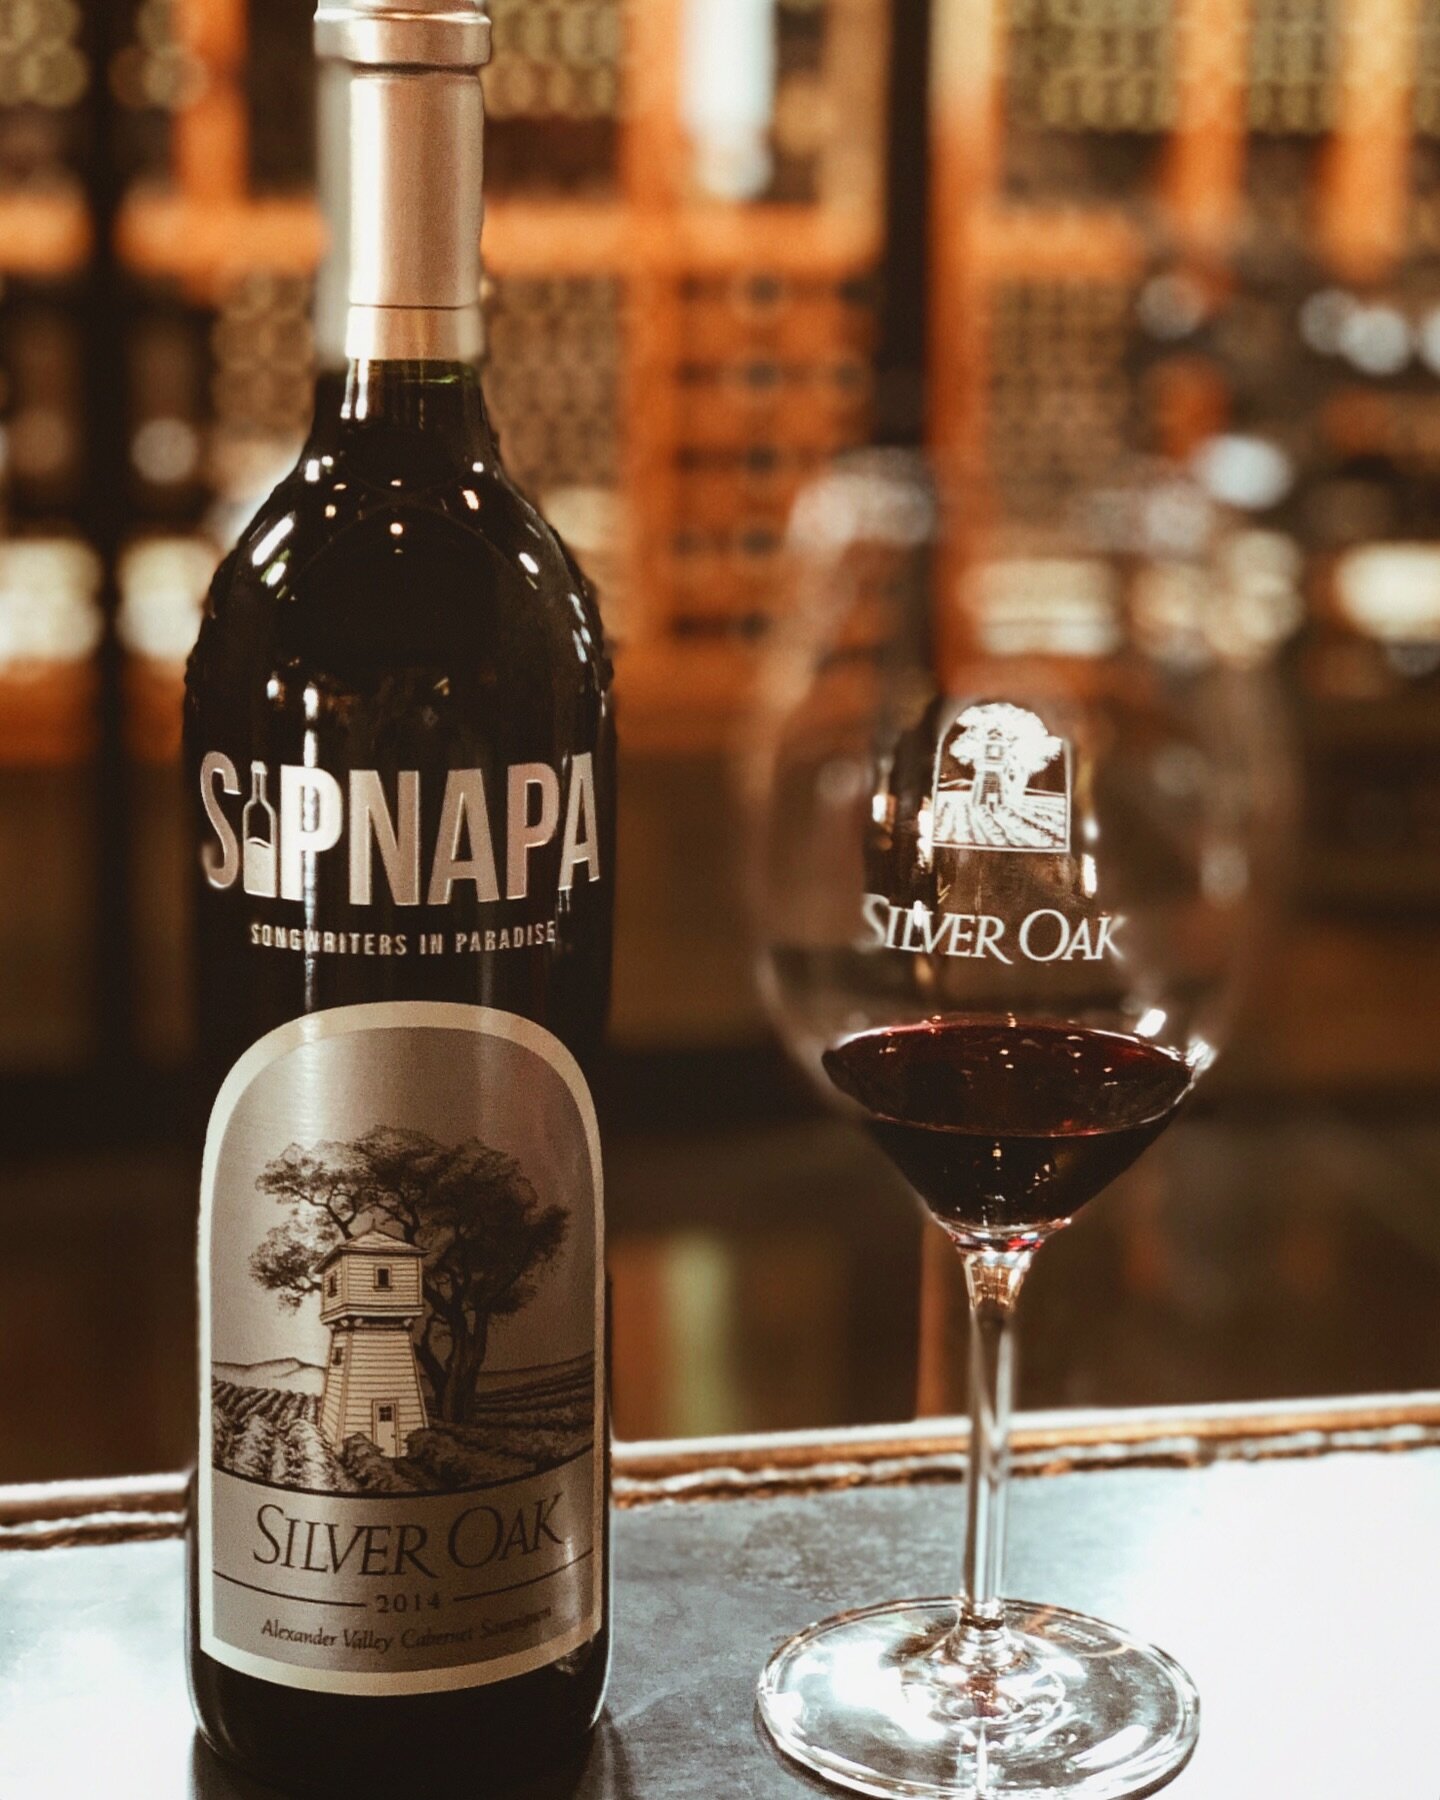 SILVER OAK &amp; SIP.  Very happy to have @silveroakcellars back in the SIP NAPA line up for this year&rsquo;s festivities!  Saturday Night April 20th is gonna be one for the ages!  Get your passes now! #sipnapa #silveroakcellars #songwritersinparadi